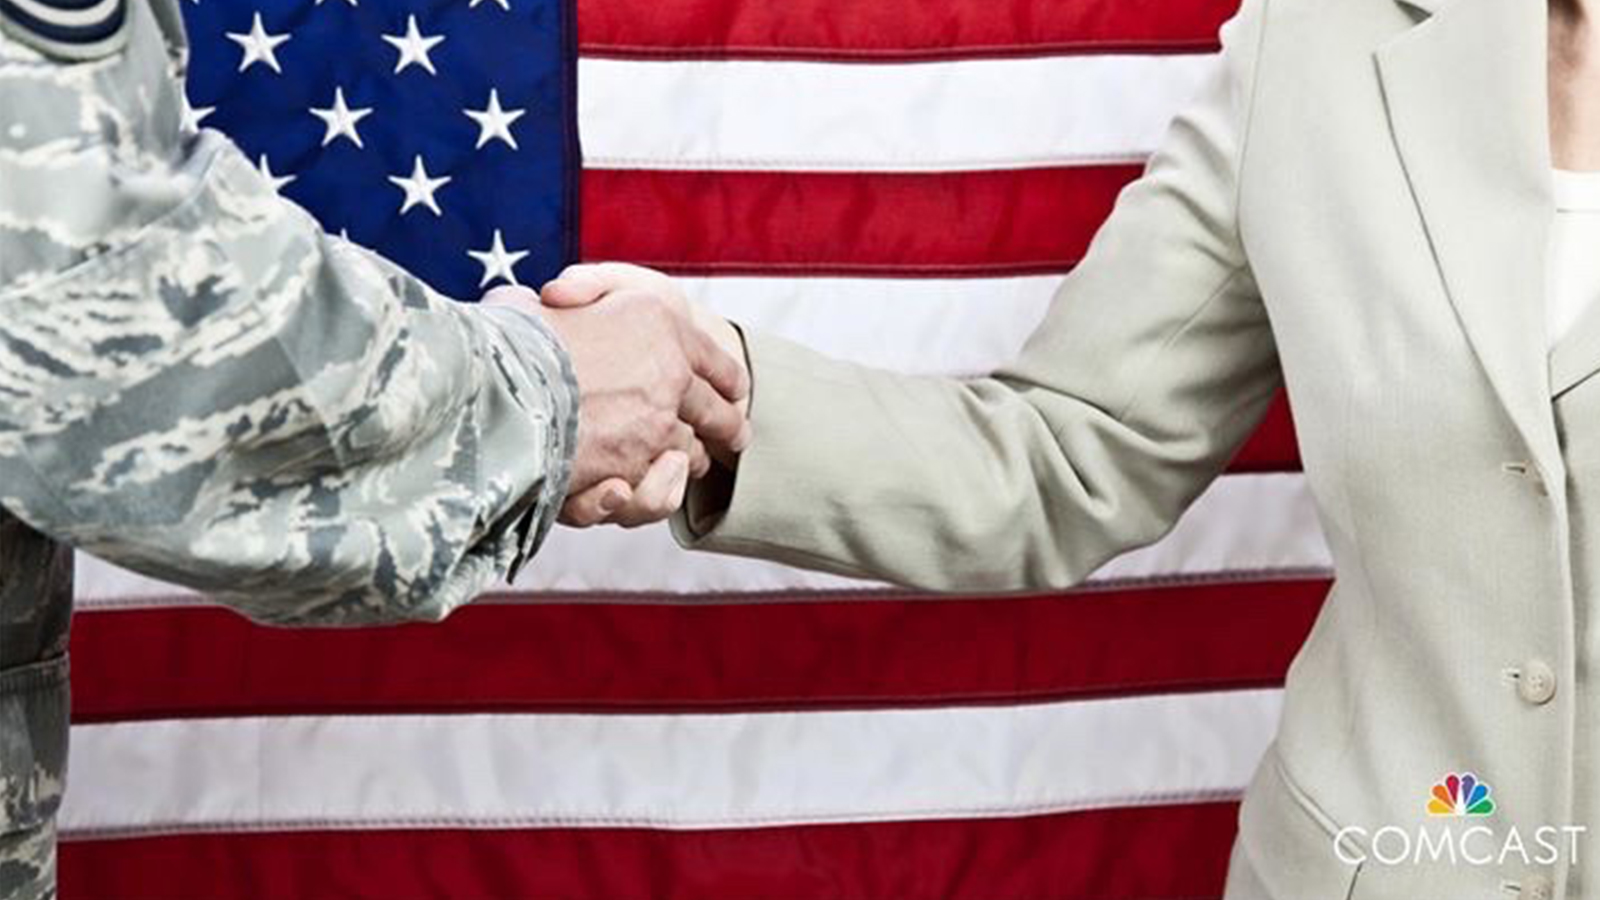 Two people shake hands in front of an American flag.